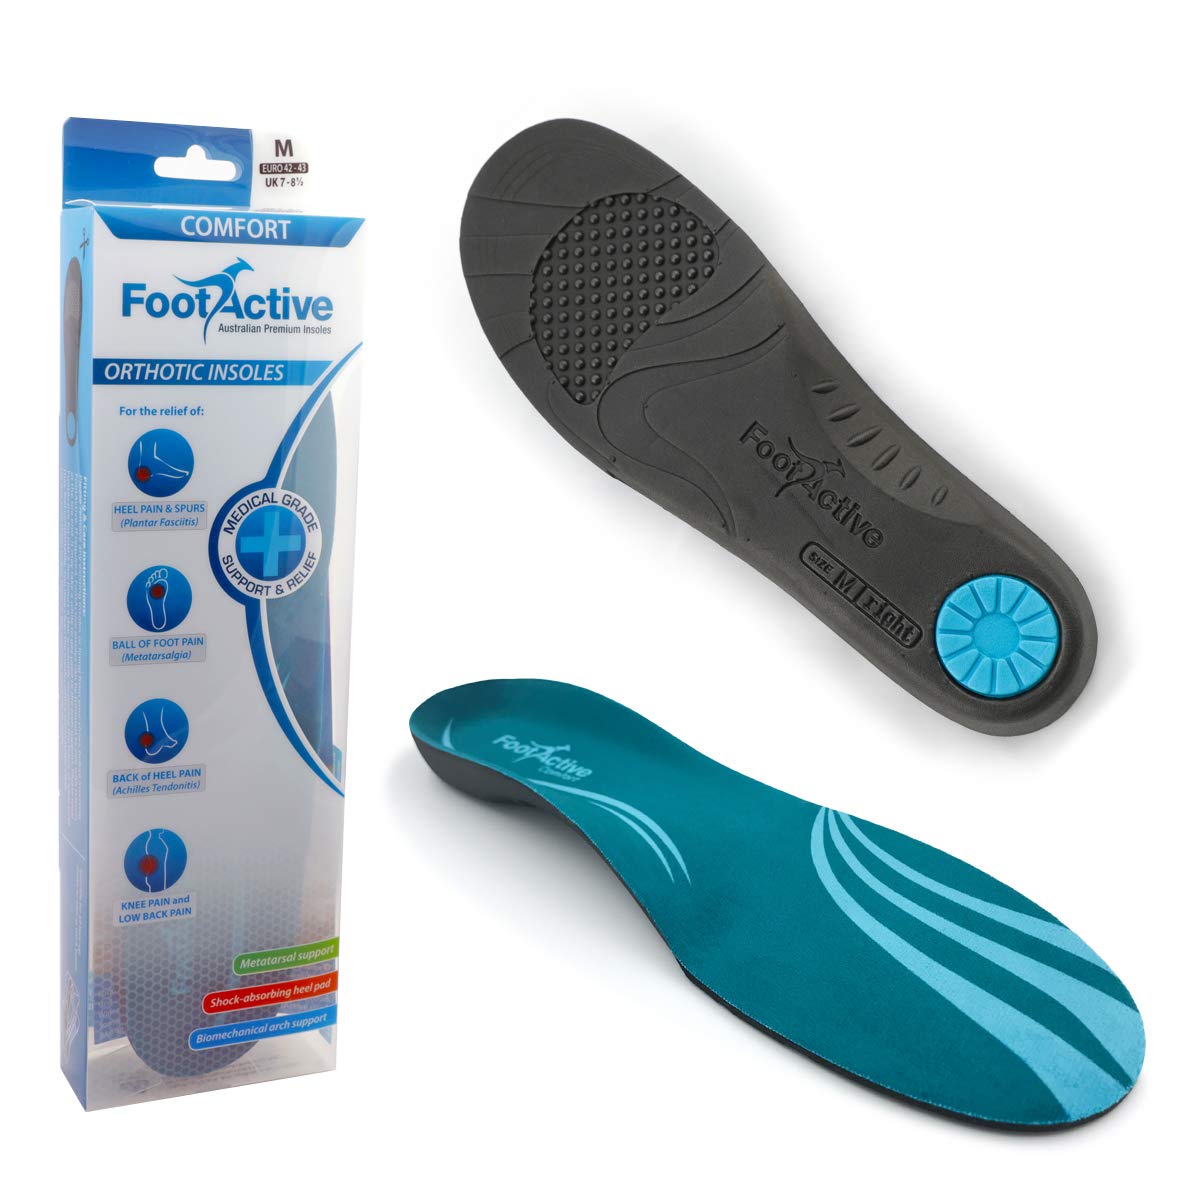 Orthotic Arch Support Insoles | FOOTACTIVE Full Length COMFORT Insoles | Designed to Reduce Heel Pain, Plantar Fasciitis and Flat Feet | NHS